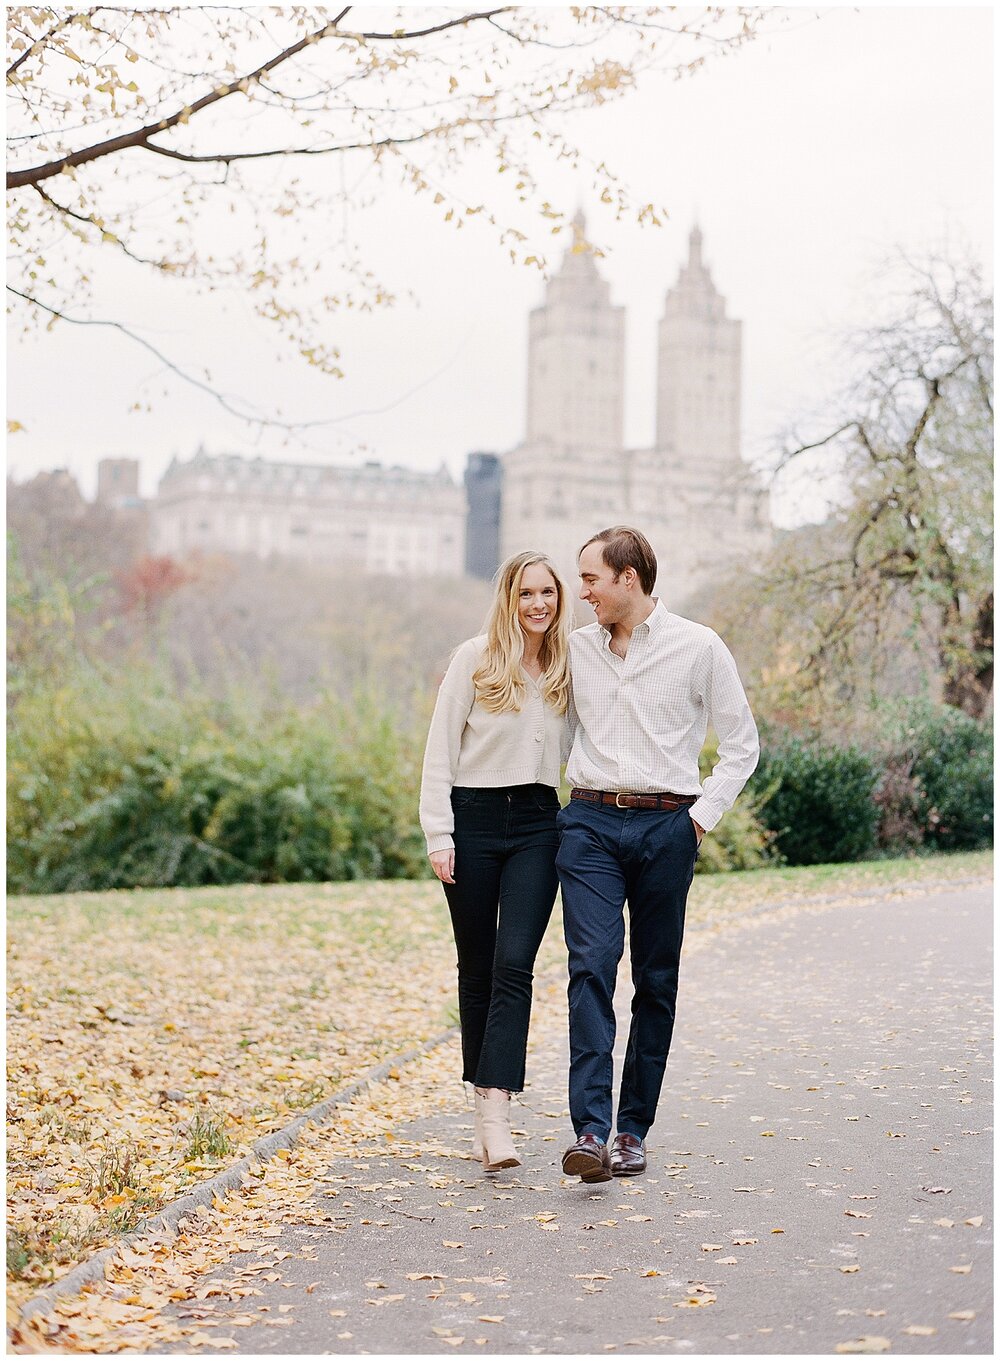  Fall engagement photos in Central Park  